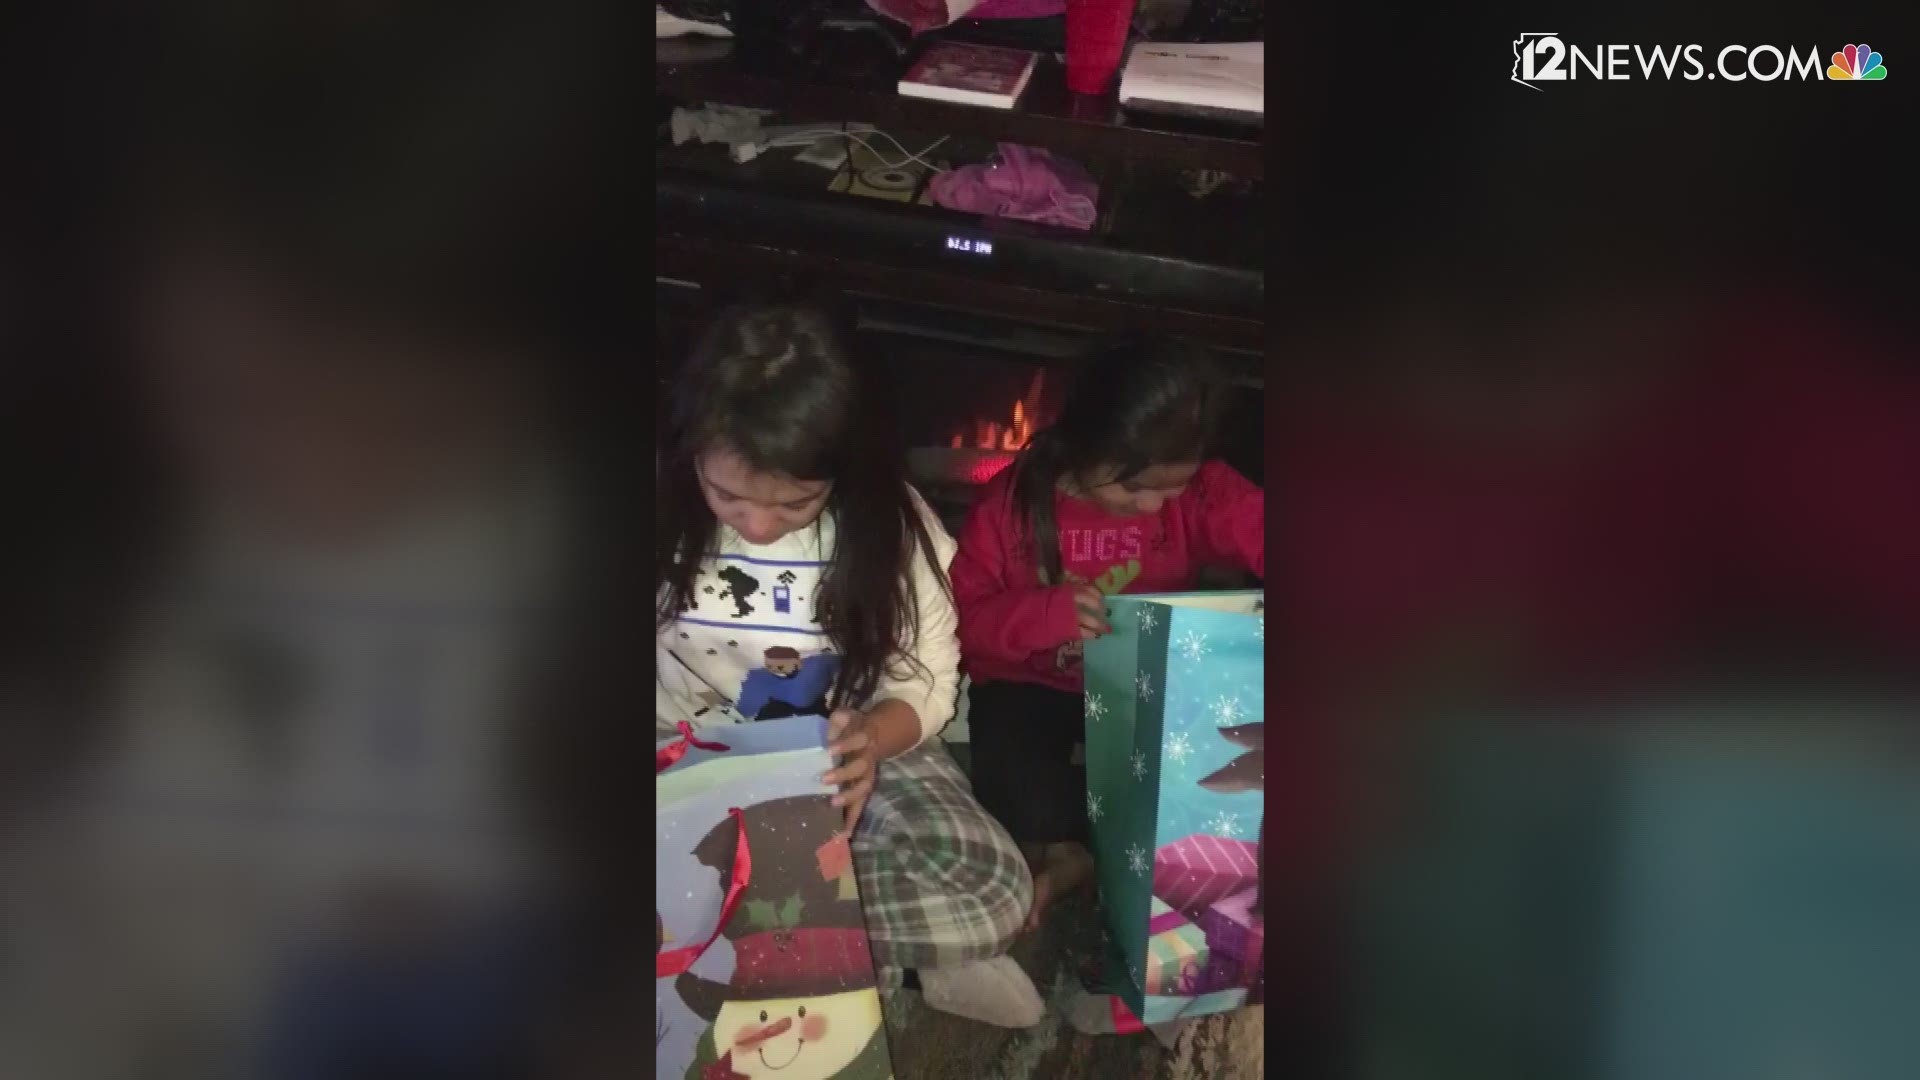 Sisters in Phoenix were surprised with bears with of their father's favorite cologne and a recording of his voice. Their father passed away in summer 2017. (Video: Alina Angel/Special to 12 News)